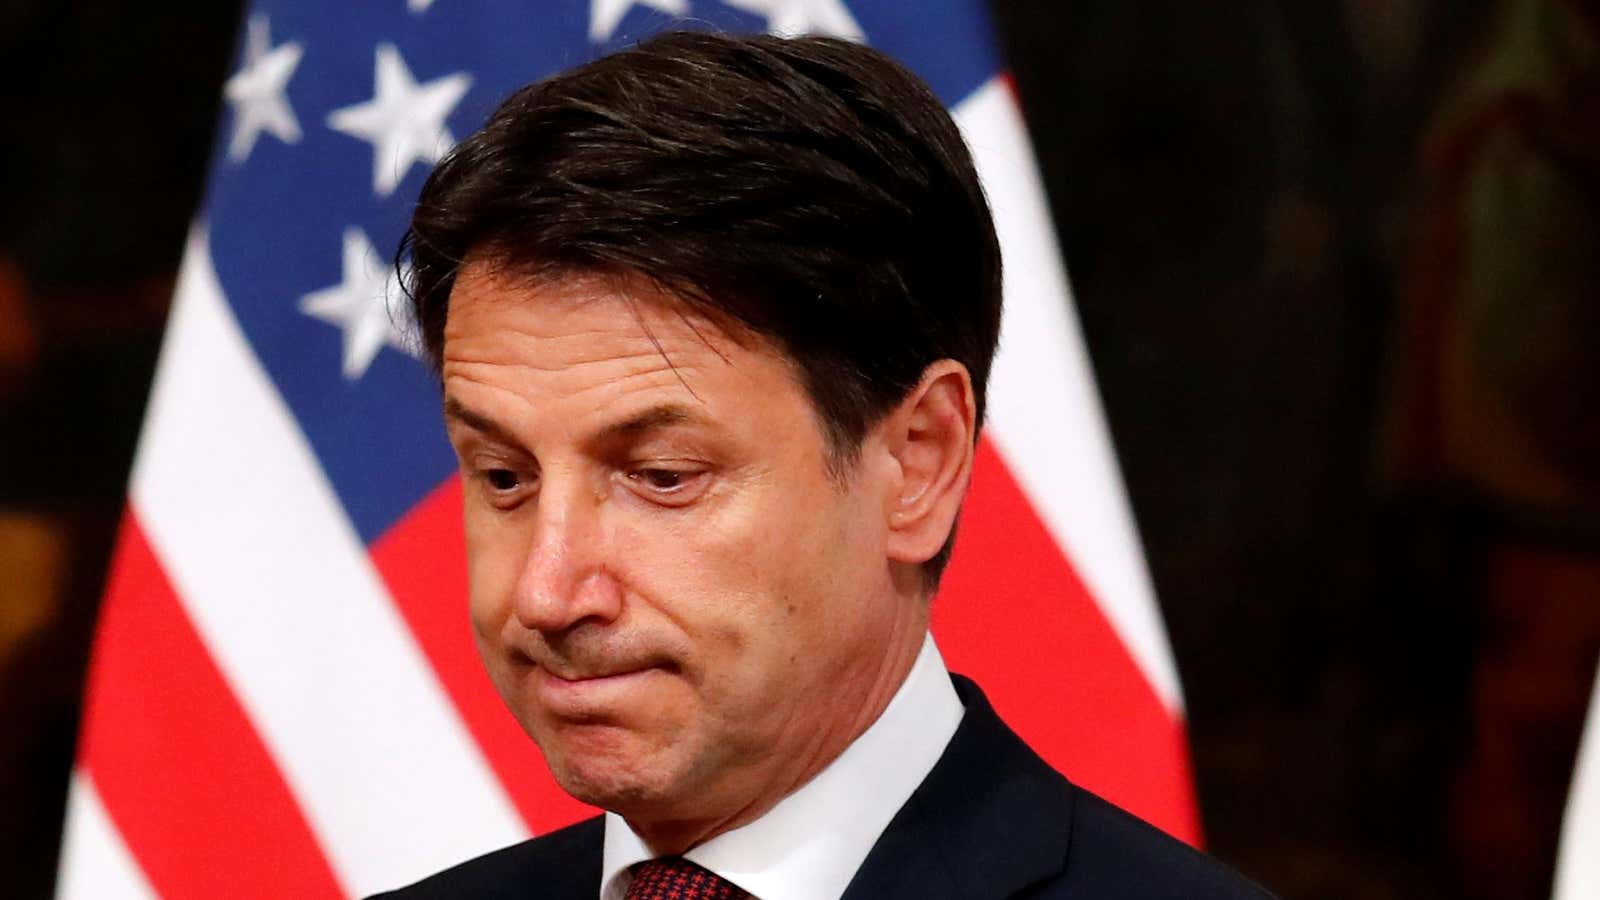 Italian Prime Minister Giuseppe Conte waits for U.S. Secretary of State Mike Pompeo in Rome, Italy, October 1, 2019. REUTERS/Remo Casilli – RC1460FF9C30